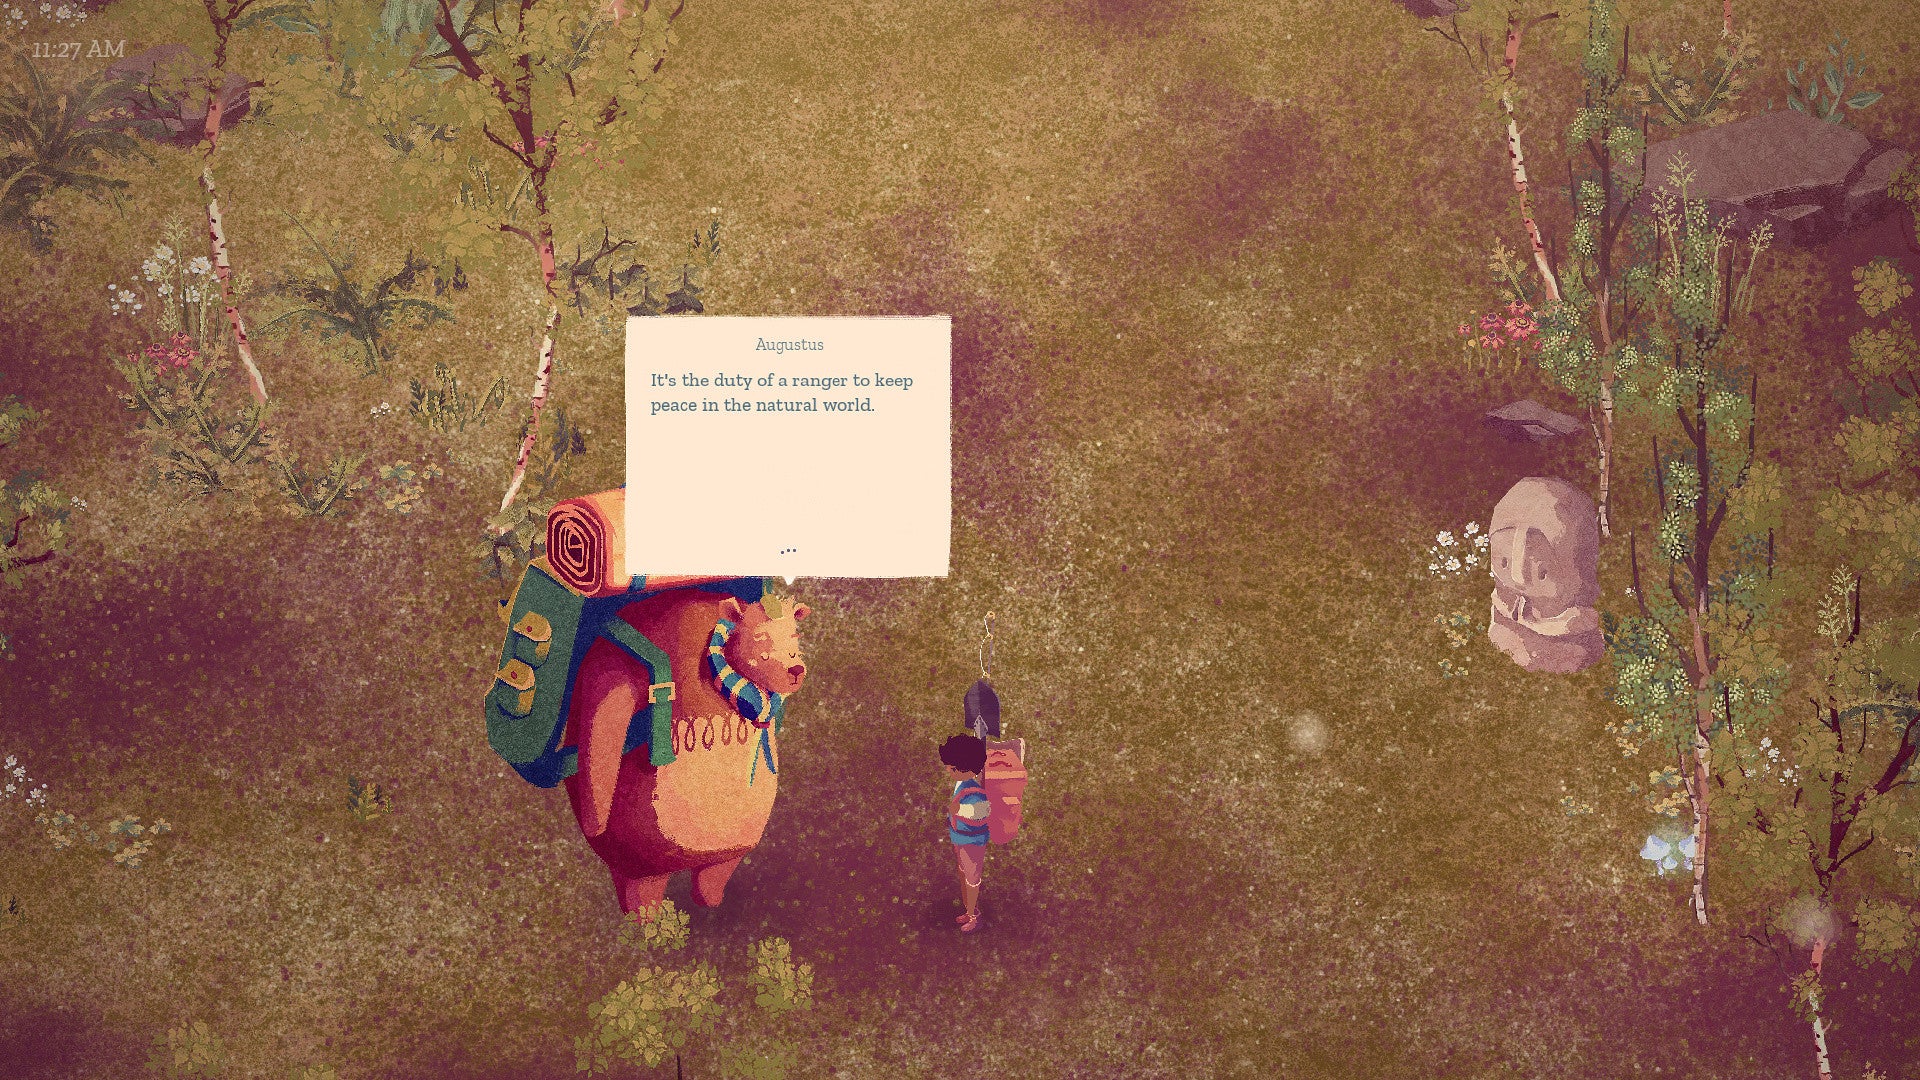 The Garden Path - The player stands in a meadow talking to a large backpack-wearing bear named Augustus who says "It's the duty of a ranger to keep peace in the natural world."